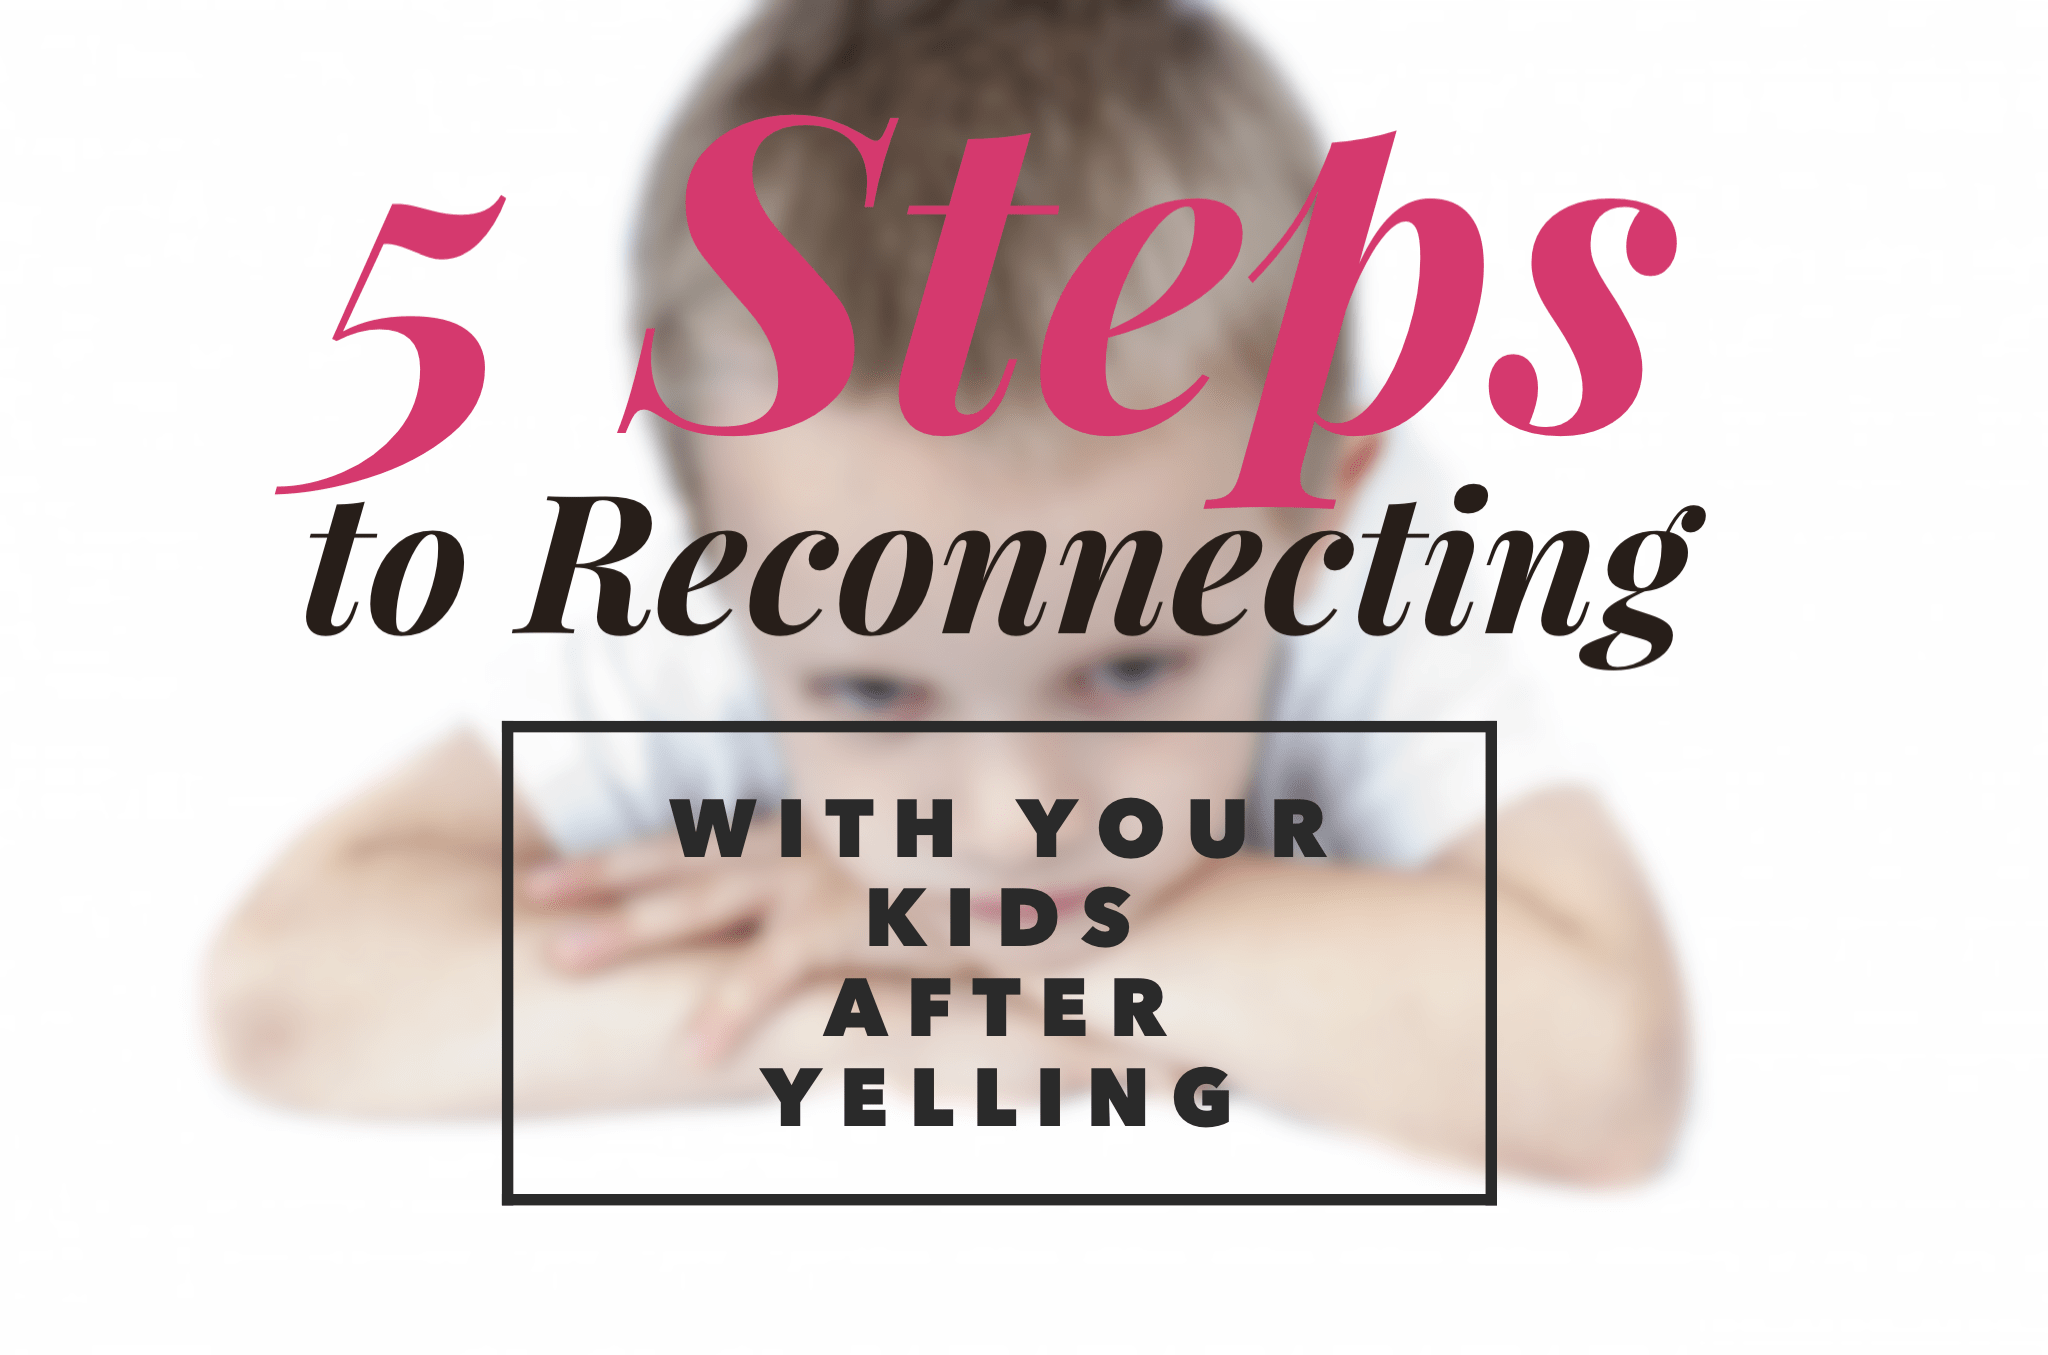 5 Steps to Reconnecting with Your Kids After Yelling